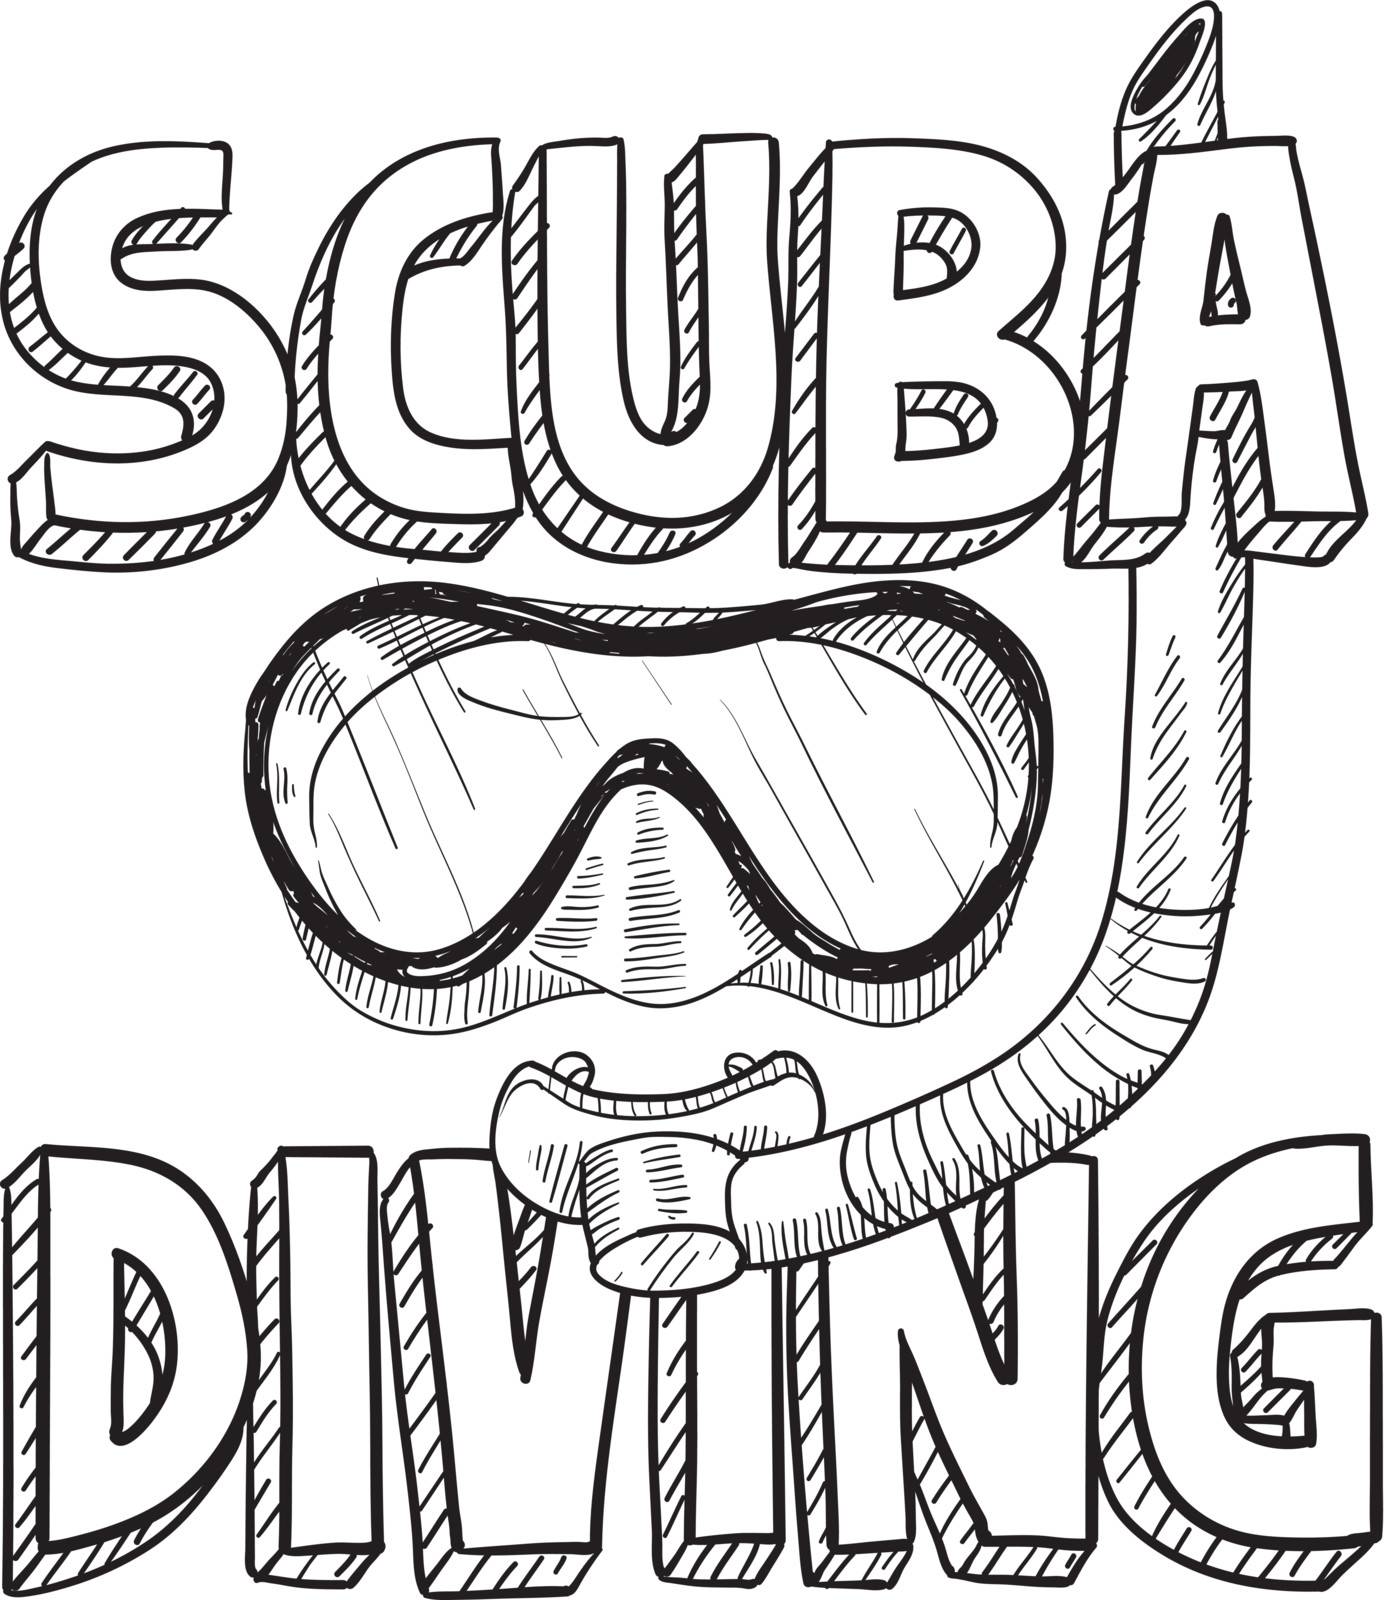 Doodle style scuba diving illustration in vector format. Includes text, diving mask, and snorkel.